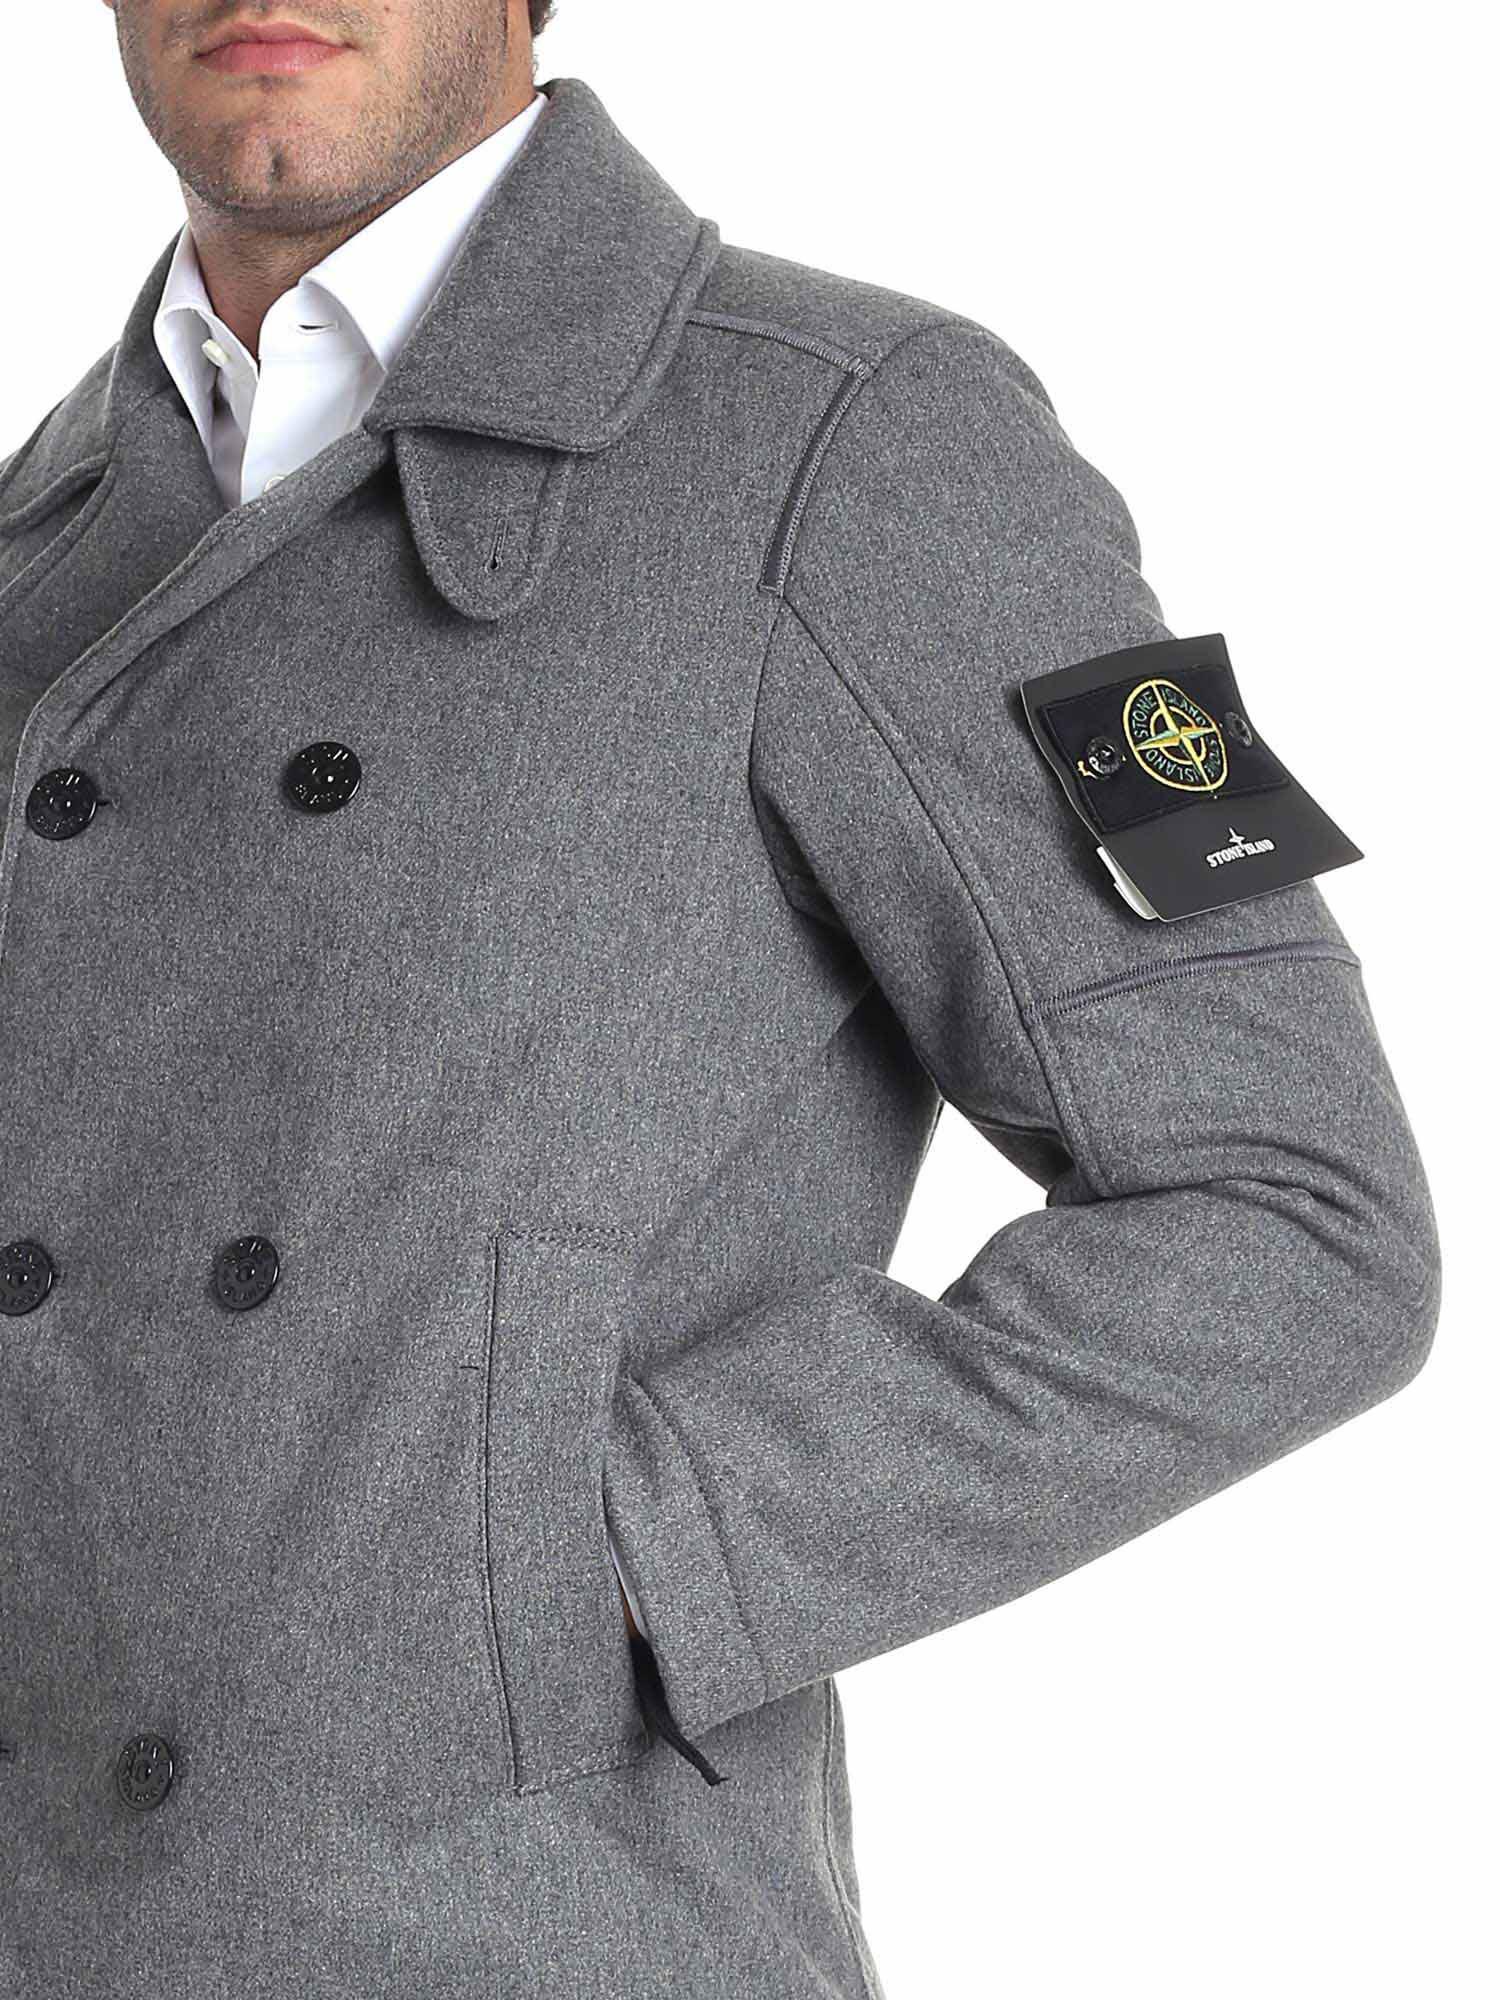 Stone Island "panno-r 4l Stretch" Grey Coat in Gray for Men - Lyst